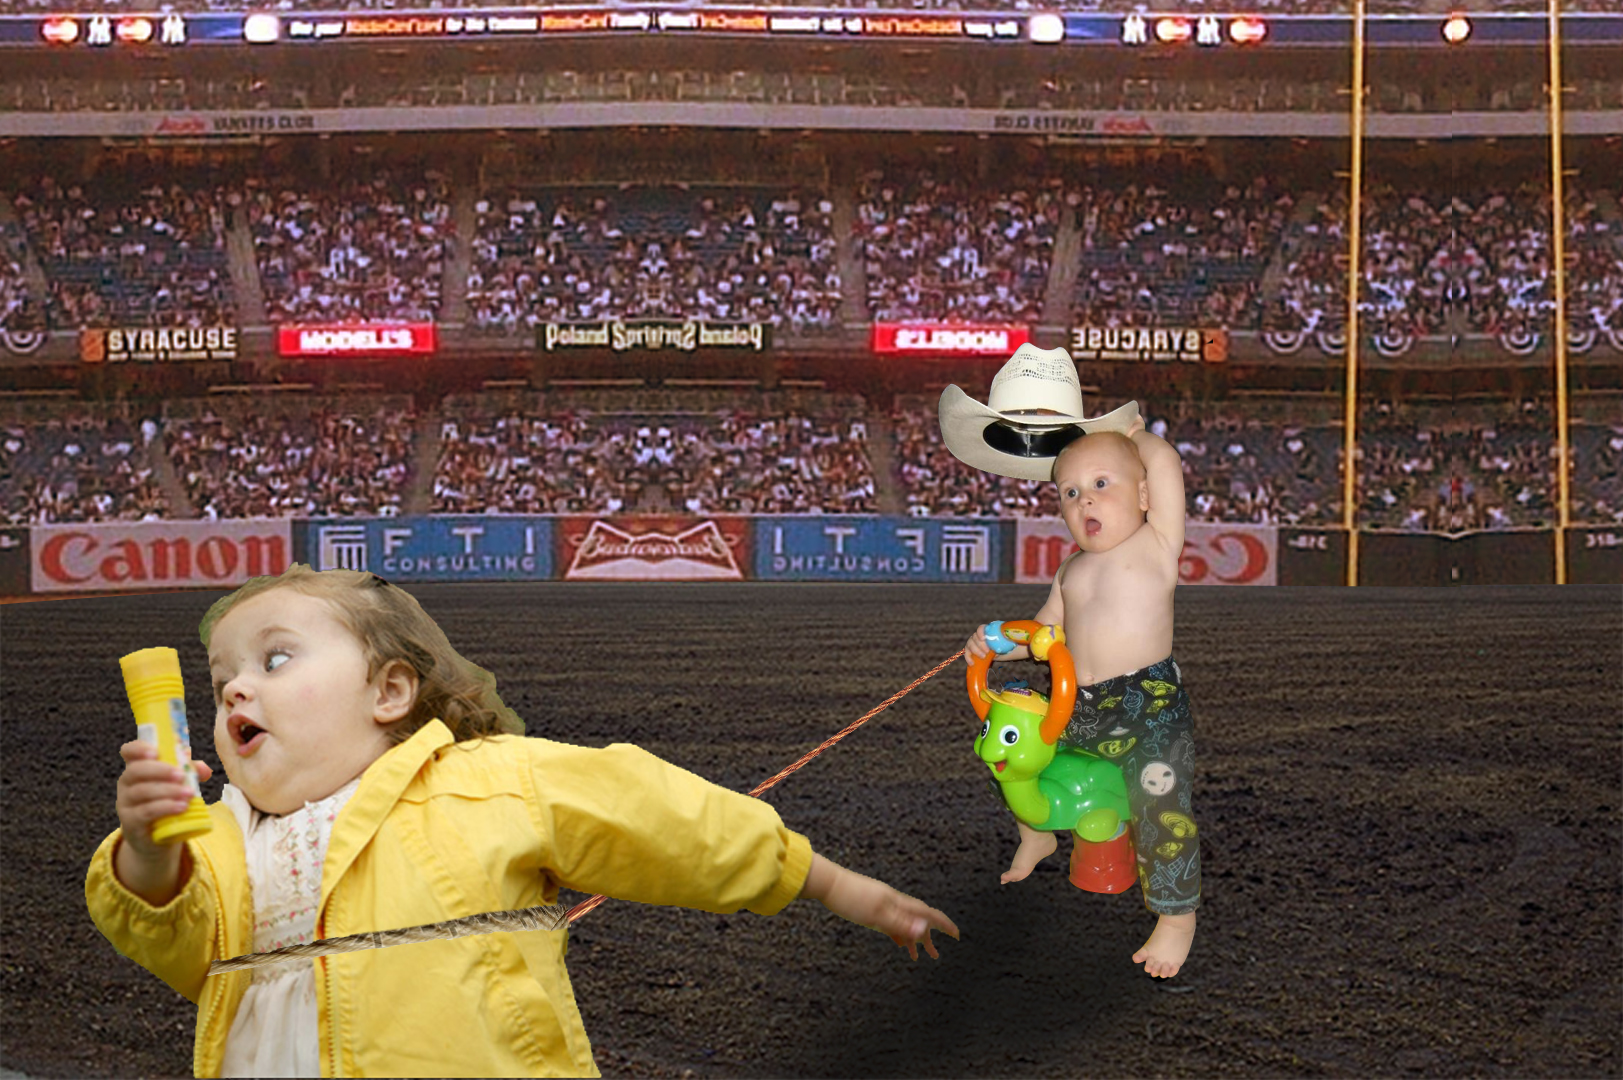 The classic meme of the little girl running from god knows what with this weeks photoshop challenge of the little boy ridding a bug acting as a cowboy lassoing the little girl in a stadium full of on lookers.